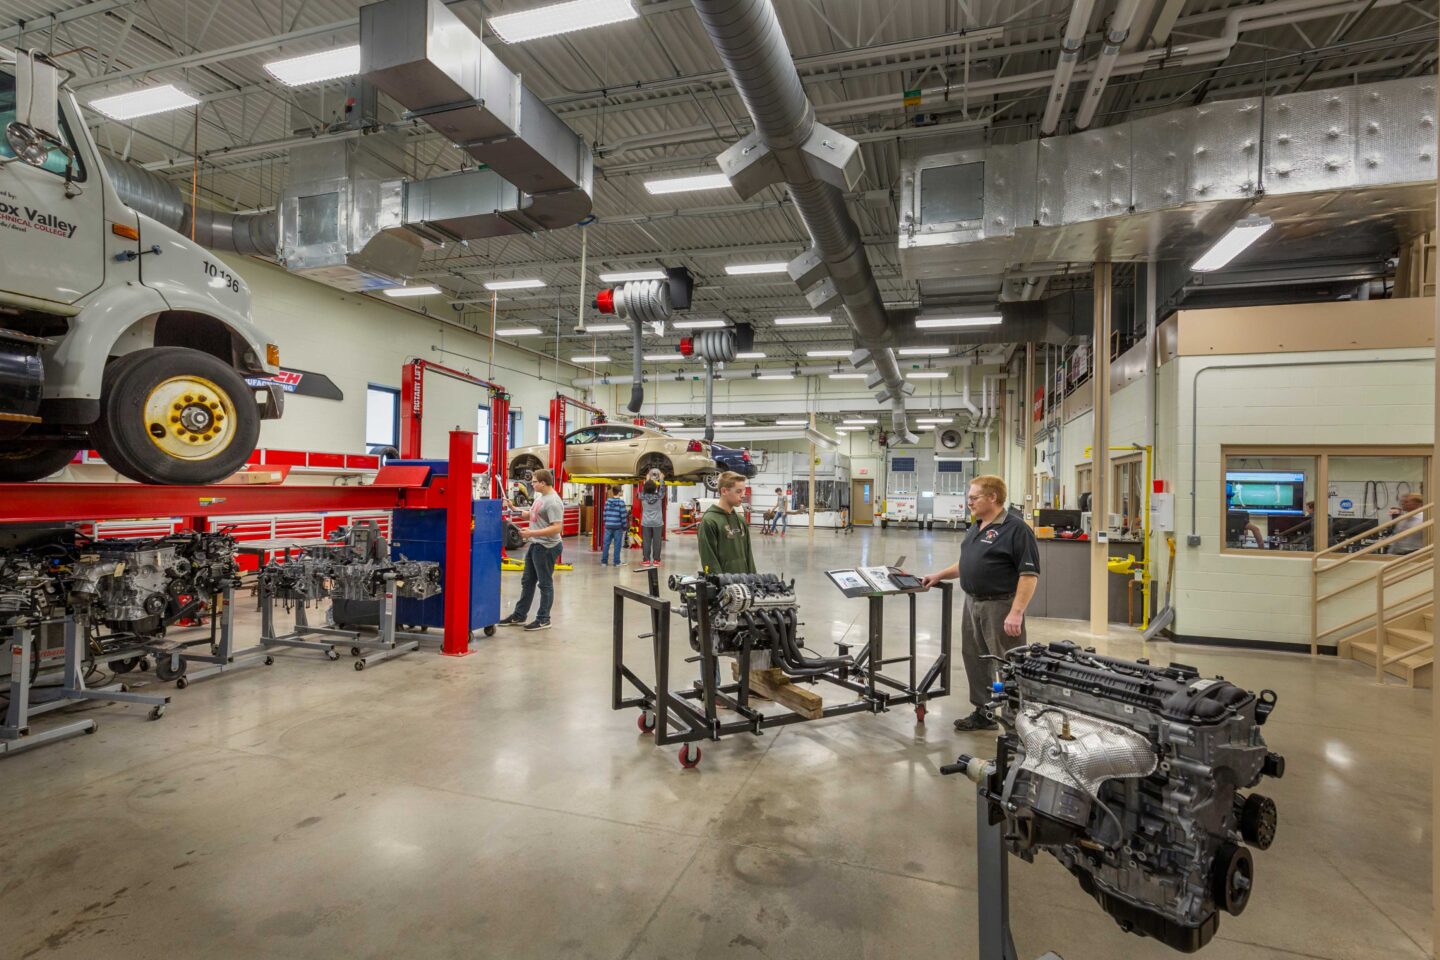 Students and teachers work in a large, active auto shop adjacent to a classroom space at Wausau East High School